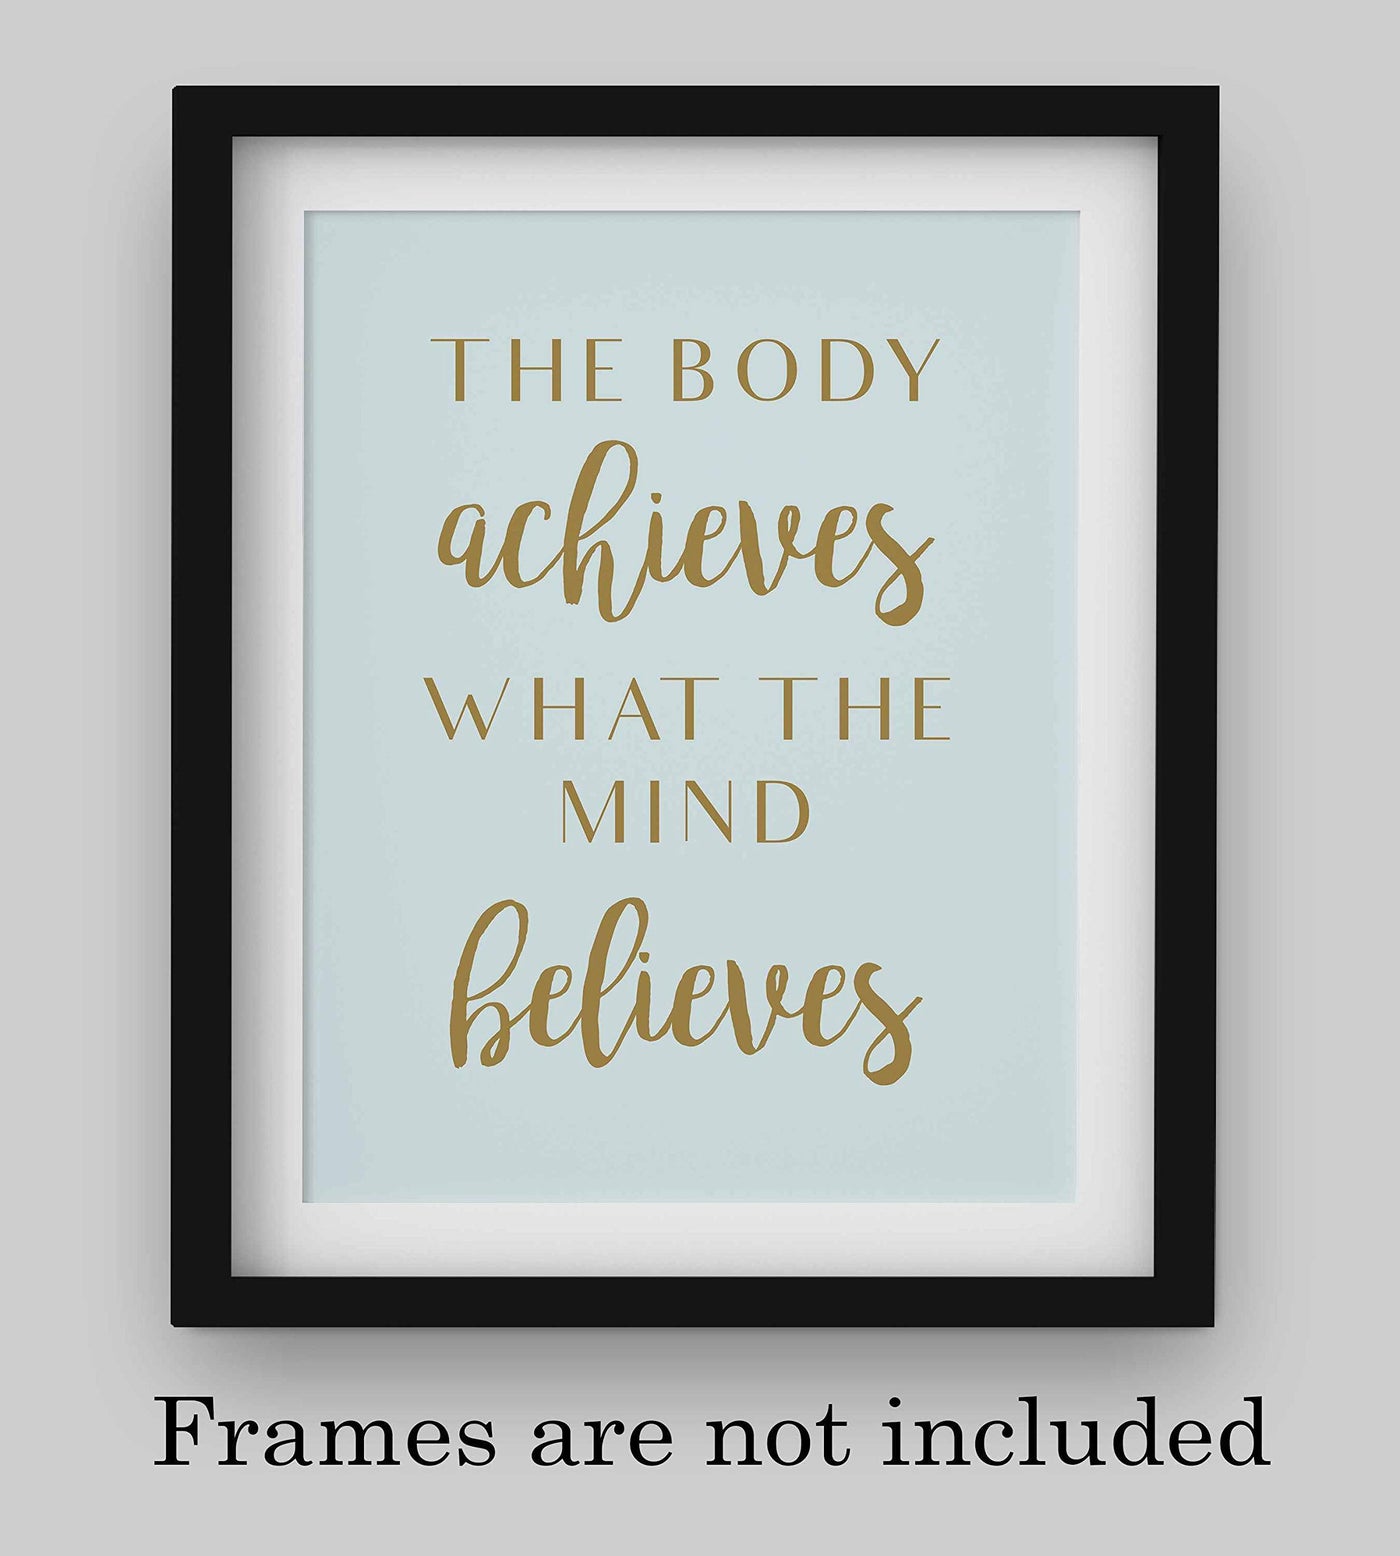 The Body Achieves What The Mind Believes Spiritual Quotes Wall Art-8 x 10" Motivational Typographic Print-Ready to Frame. Home-Studio-Office-Classroom-Zen Decor! Great Positive Decoration for All!